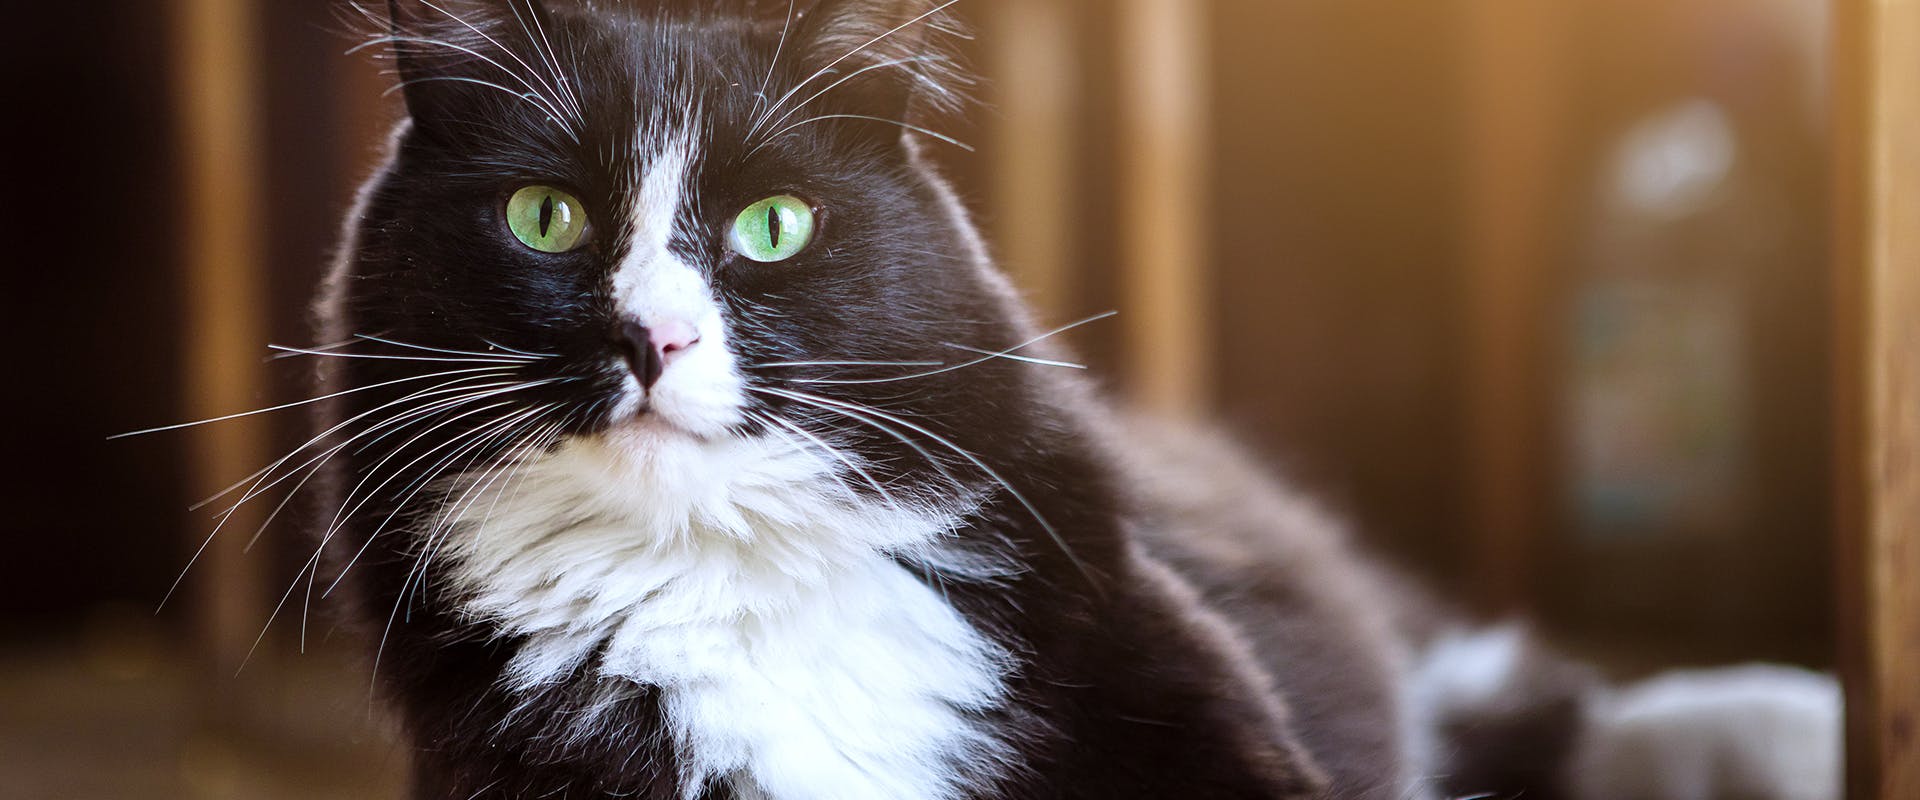 Tuxedo cat names - a fluffy black and white cat